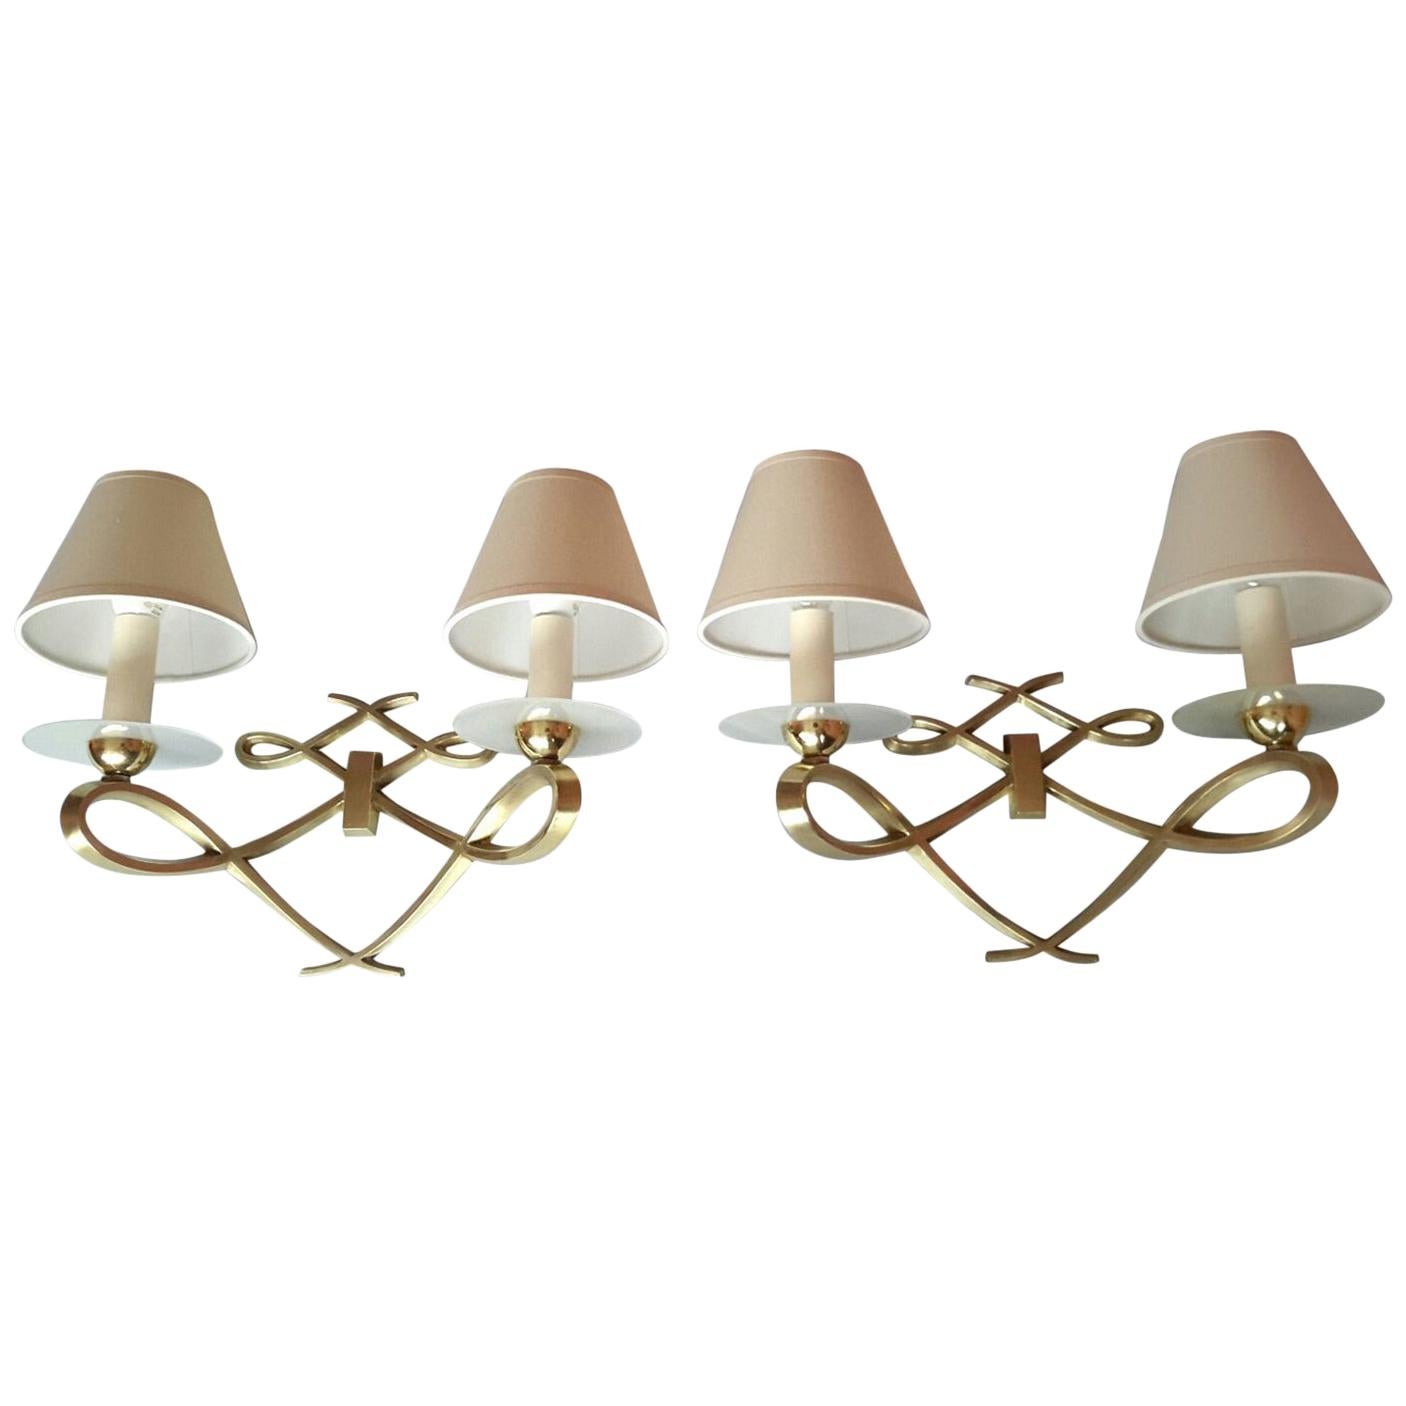 Pair of French Double Sconces Leleu Style by Arlus, France, 1950s